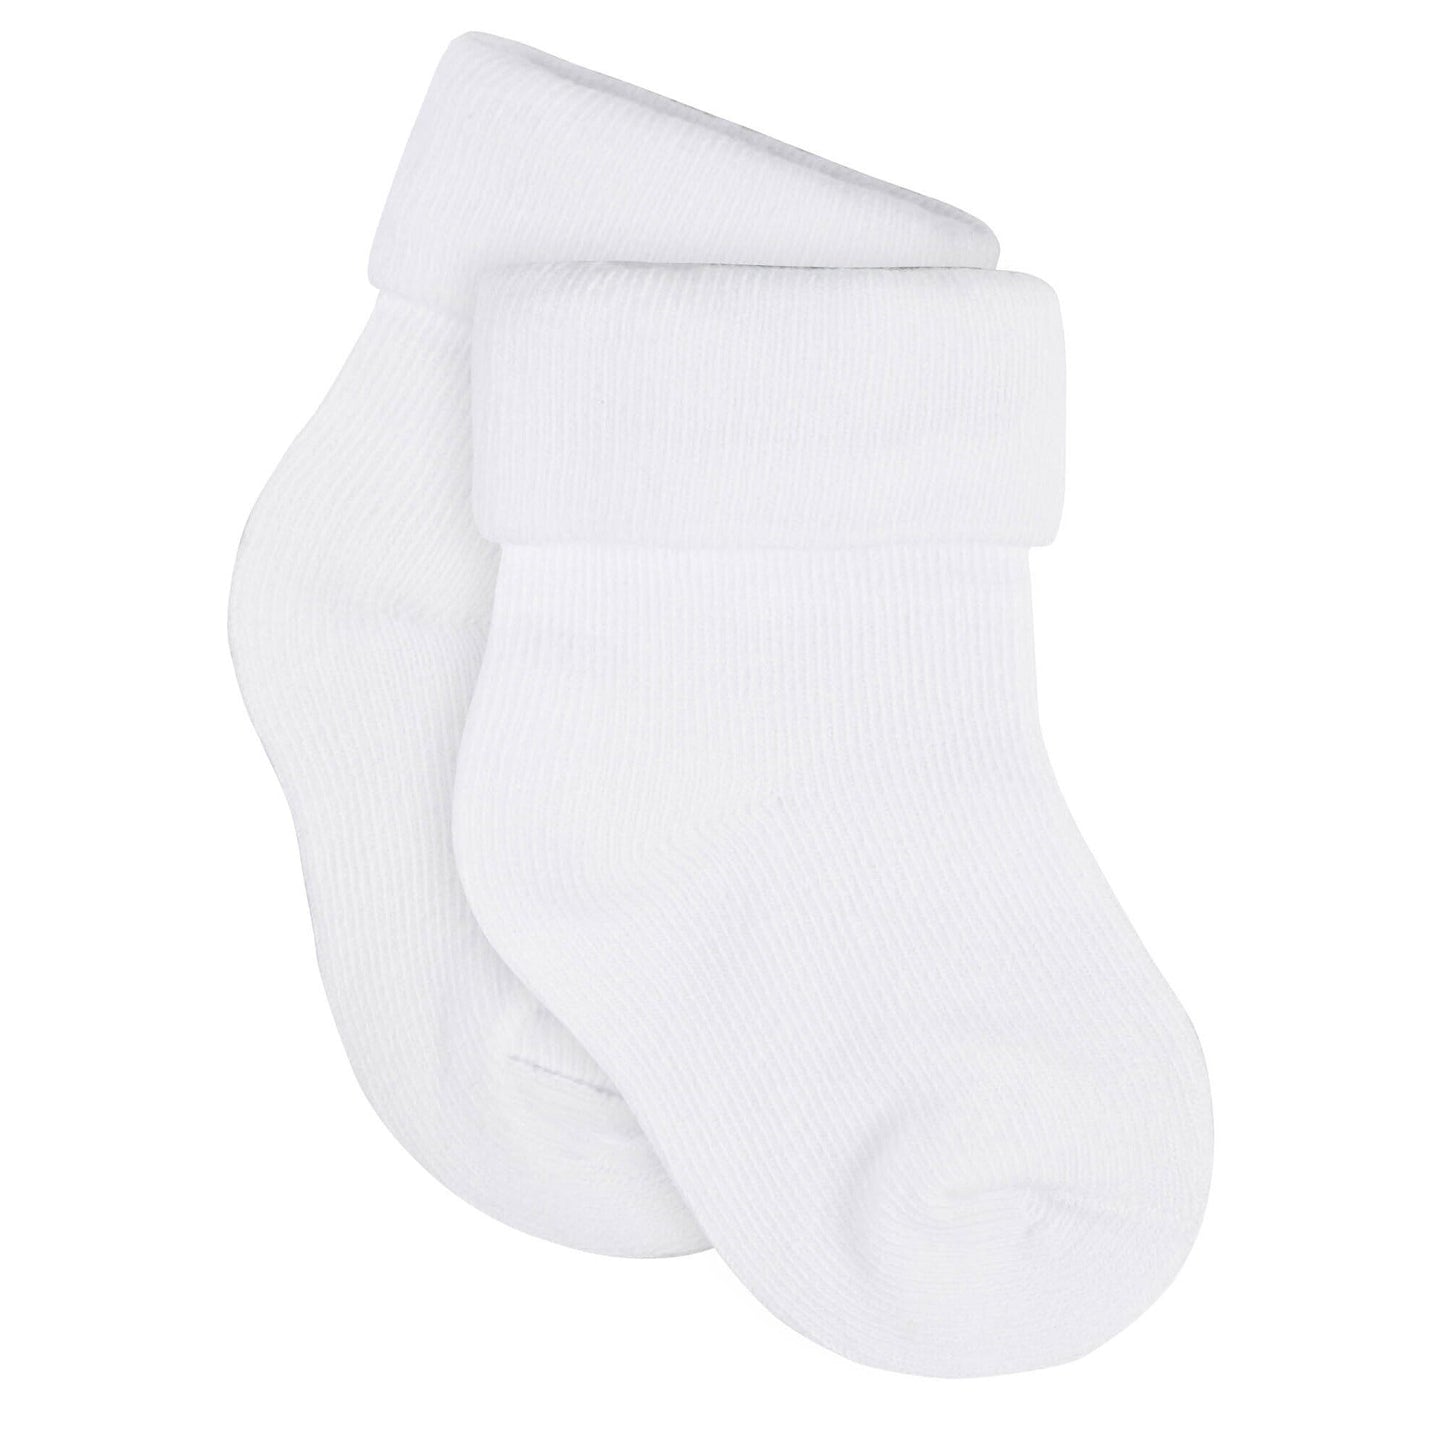 12-Pack Baby Neutral White Jersey Cuffed Bootie Socks